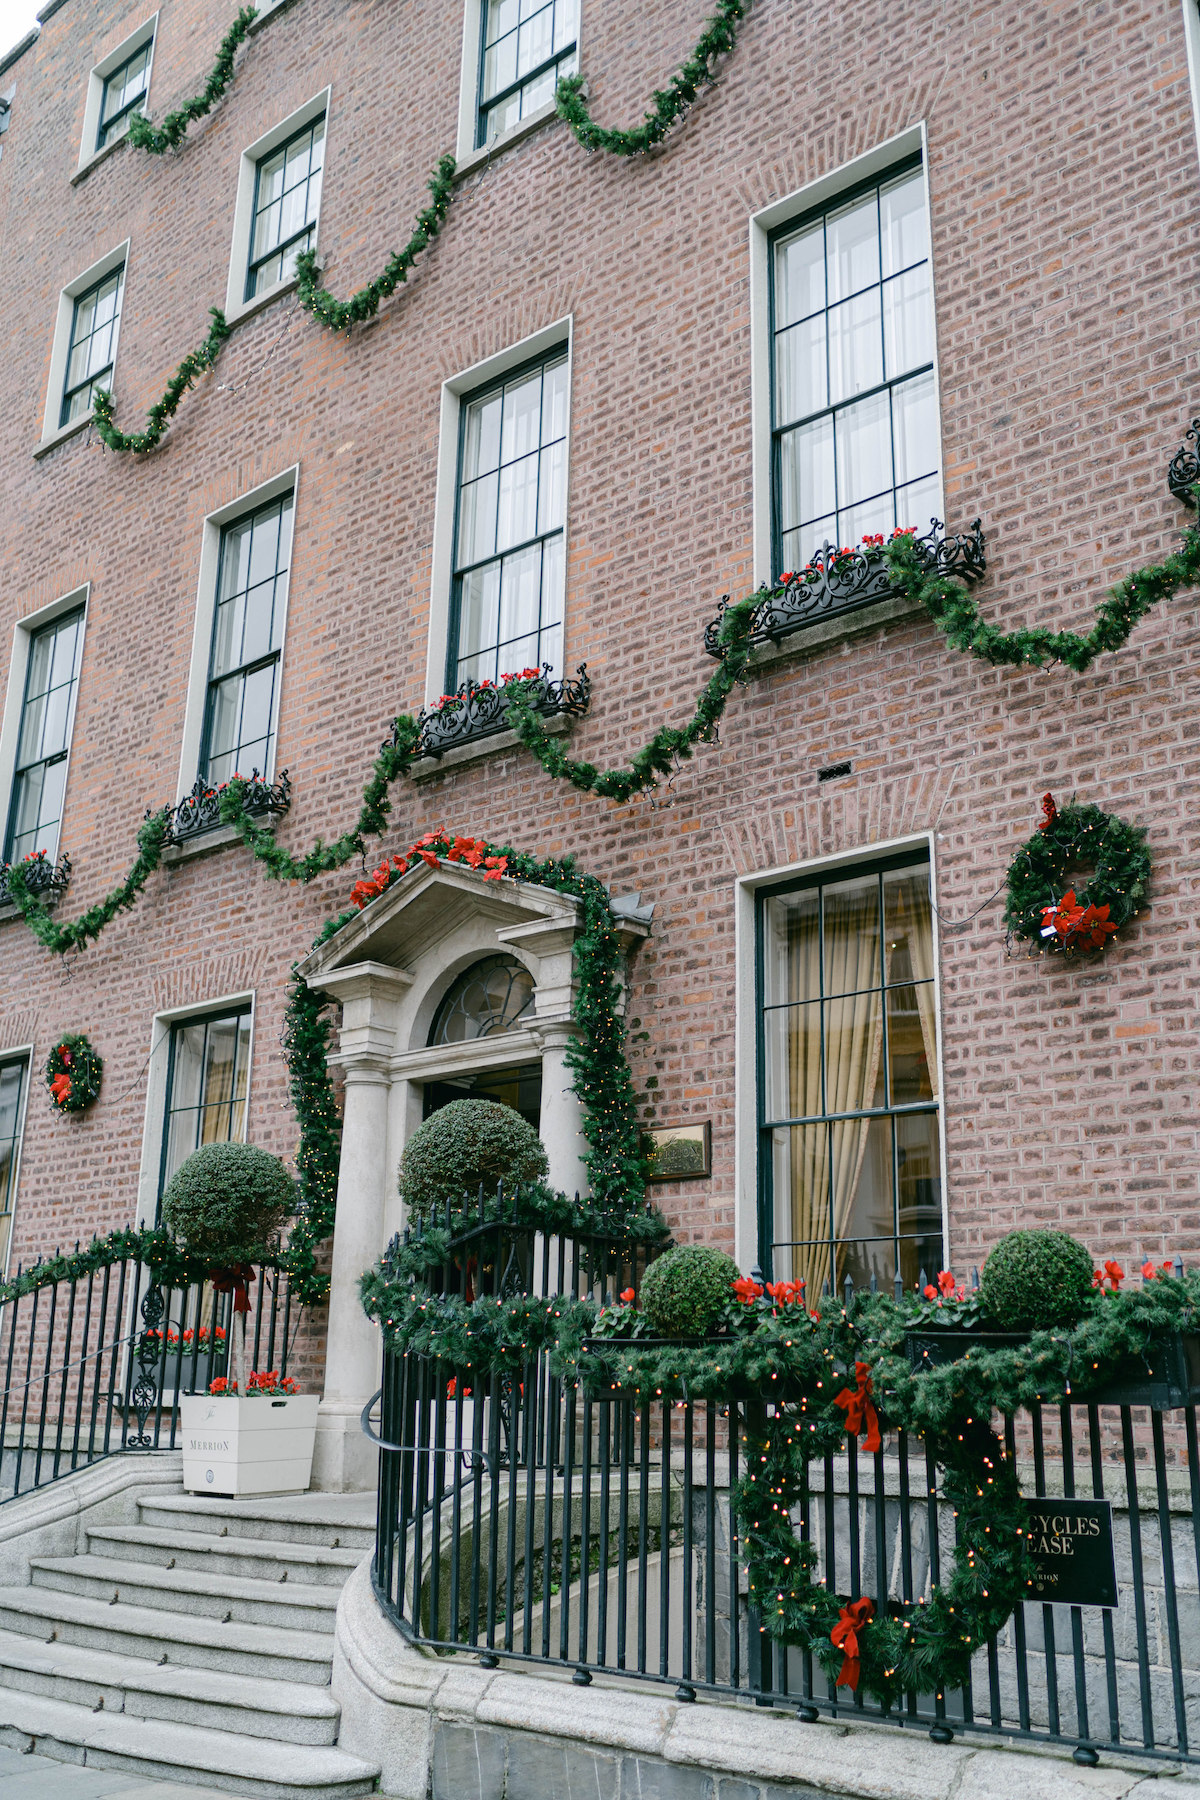 Merrion Hotel at Christmas